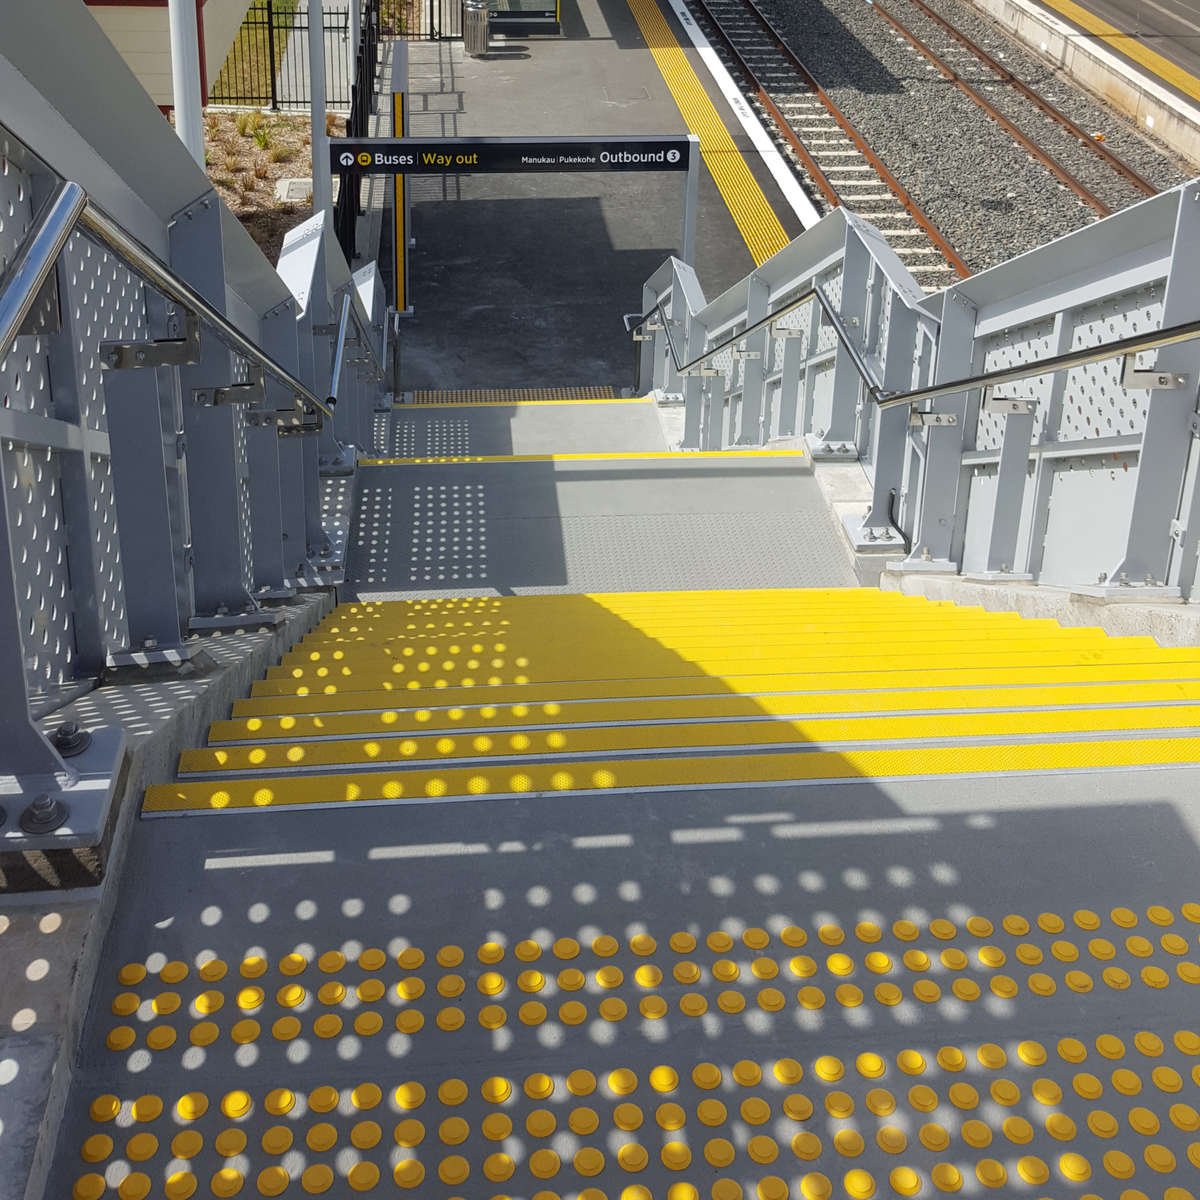 Yellow polyurethane tactile indicators and stair nosing on concrete at train station stairs